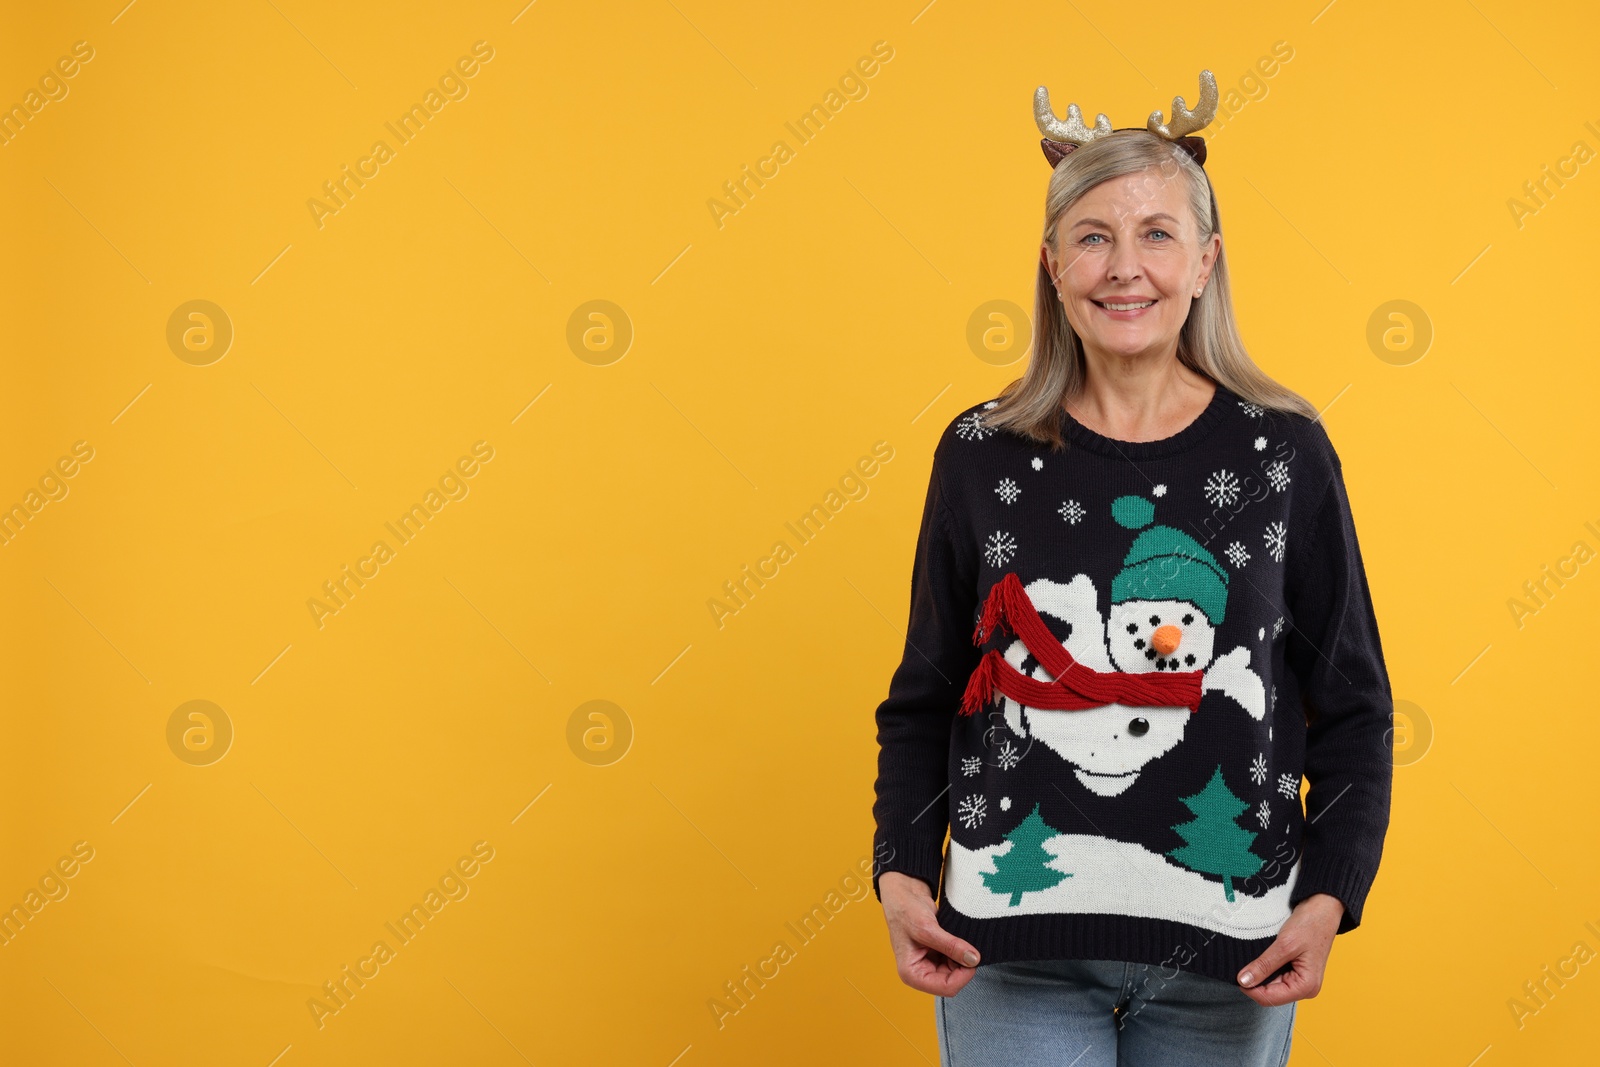 Photo of Happy senior woman in deer headband showing Christmas sweater on orange background. Space for text